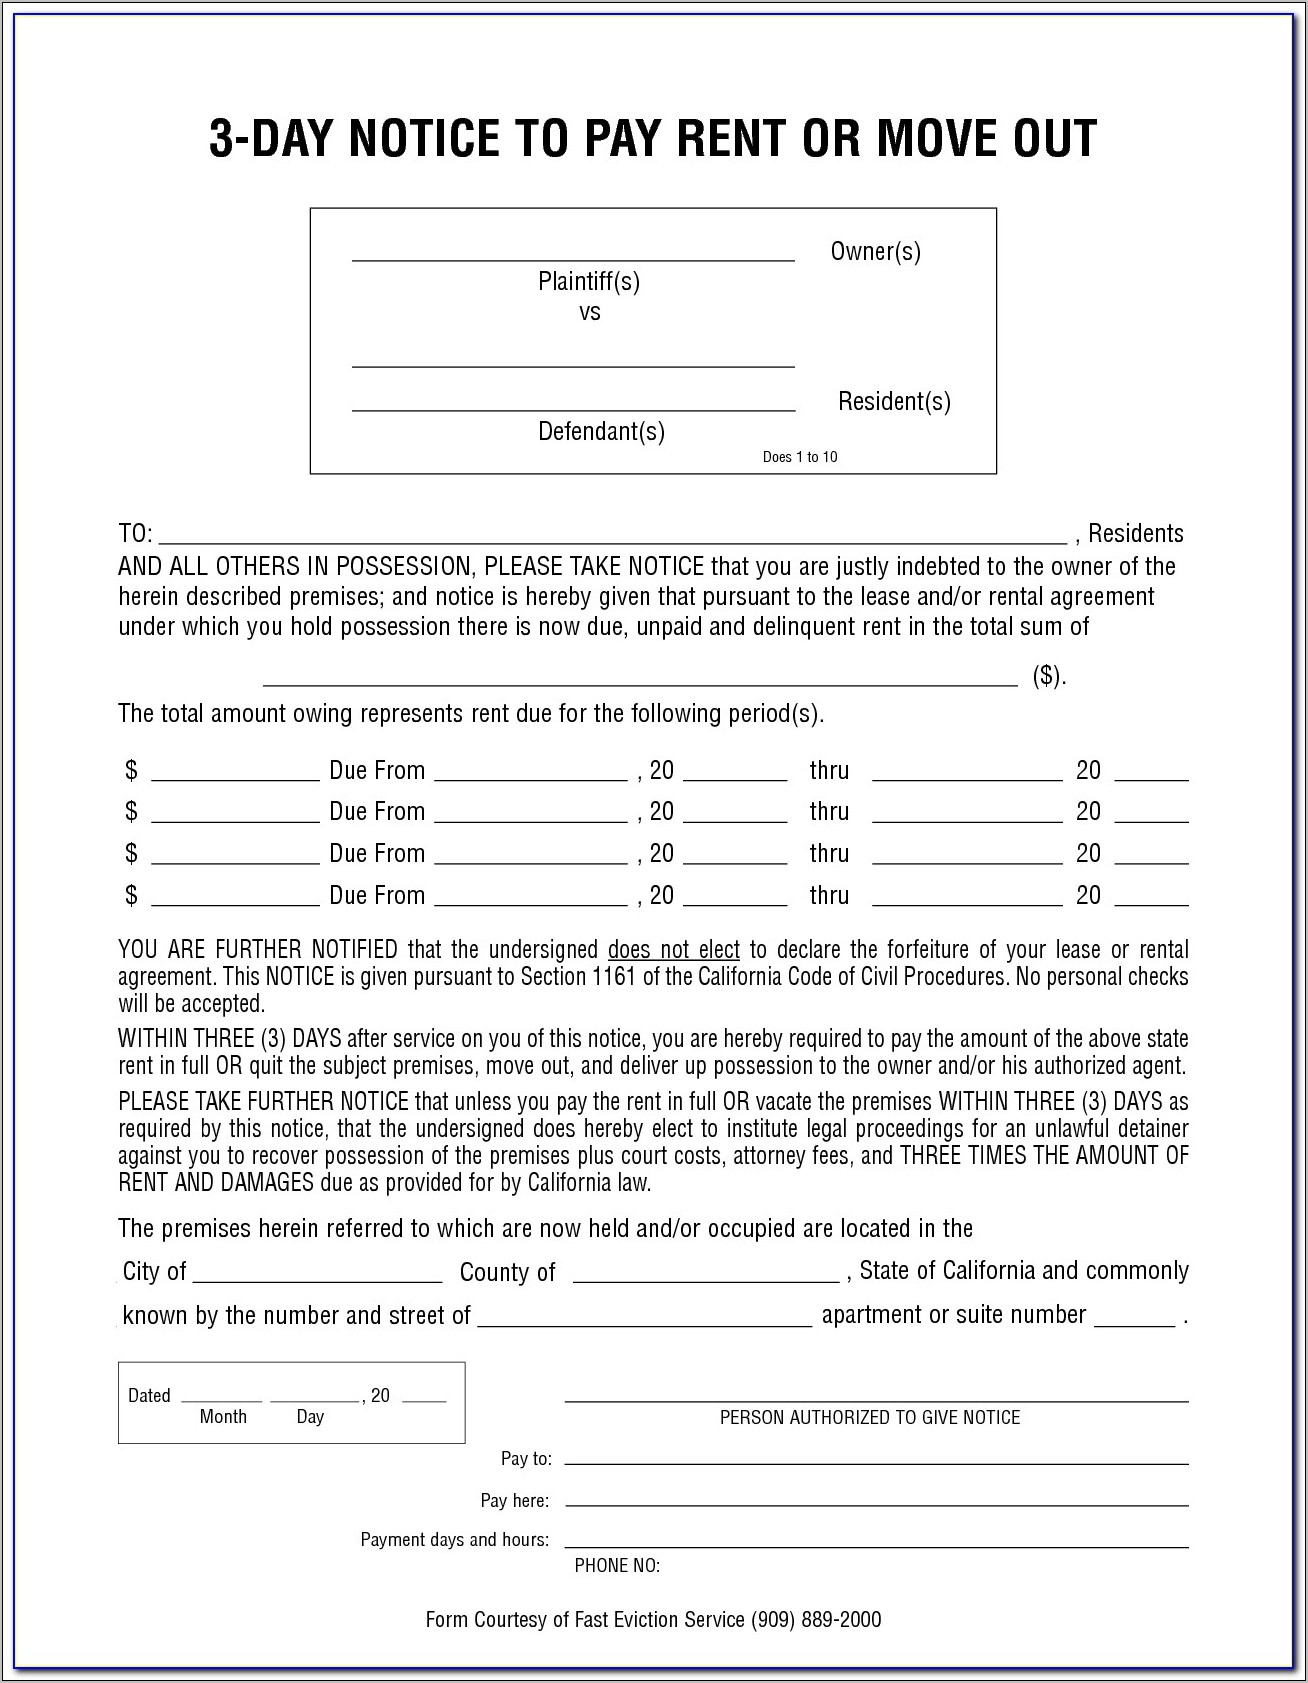 California 3 Day Eviction Notice Form